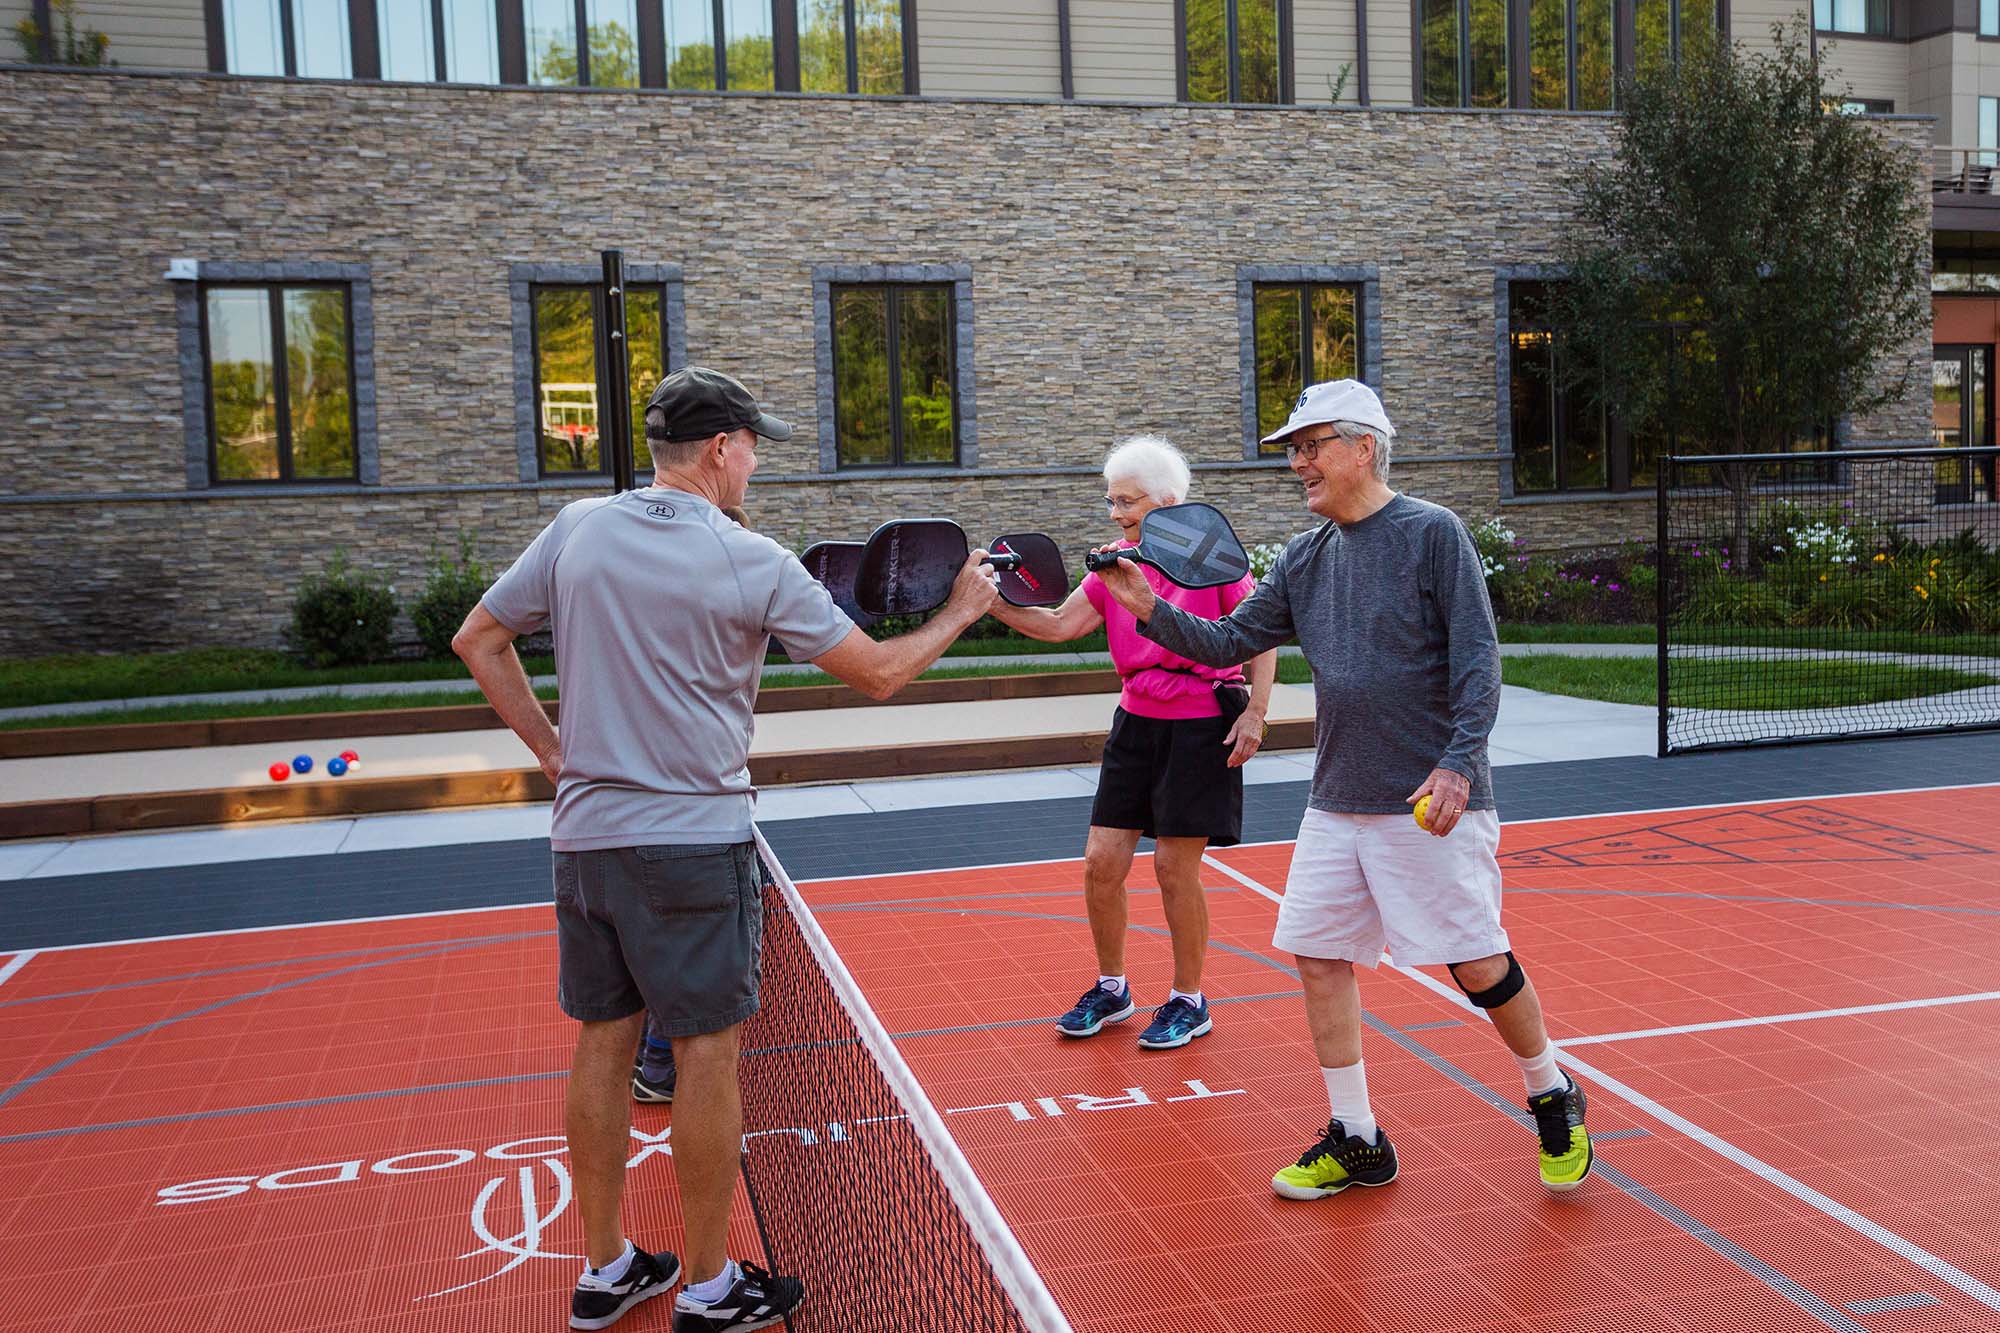 older adults in the independent living community engaging in sports